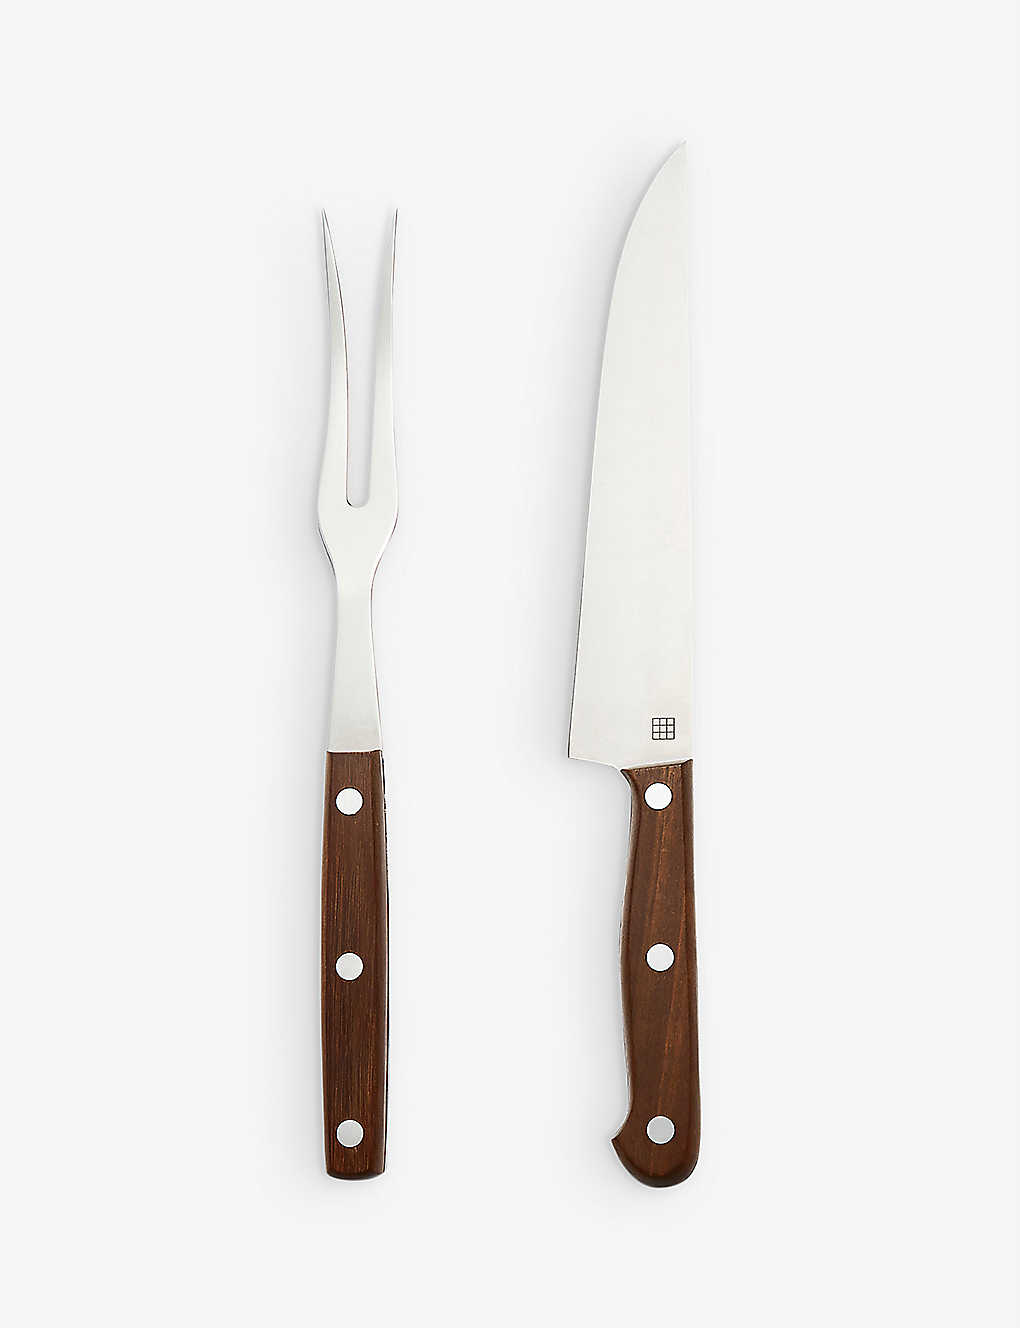 Soho Home Dawson Stainless Steel And Oak Carving Knife Set Of 2